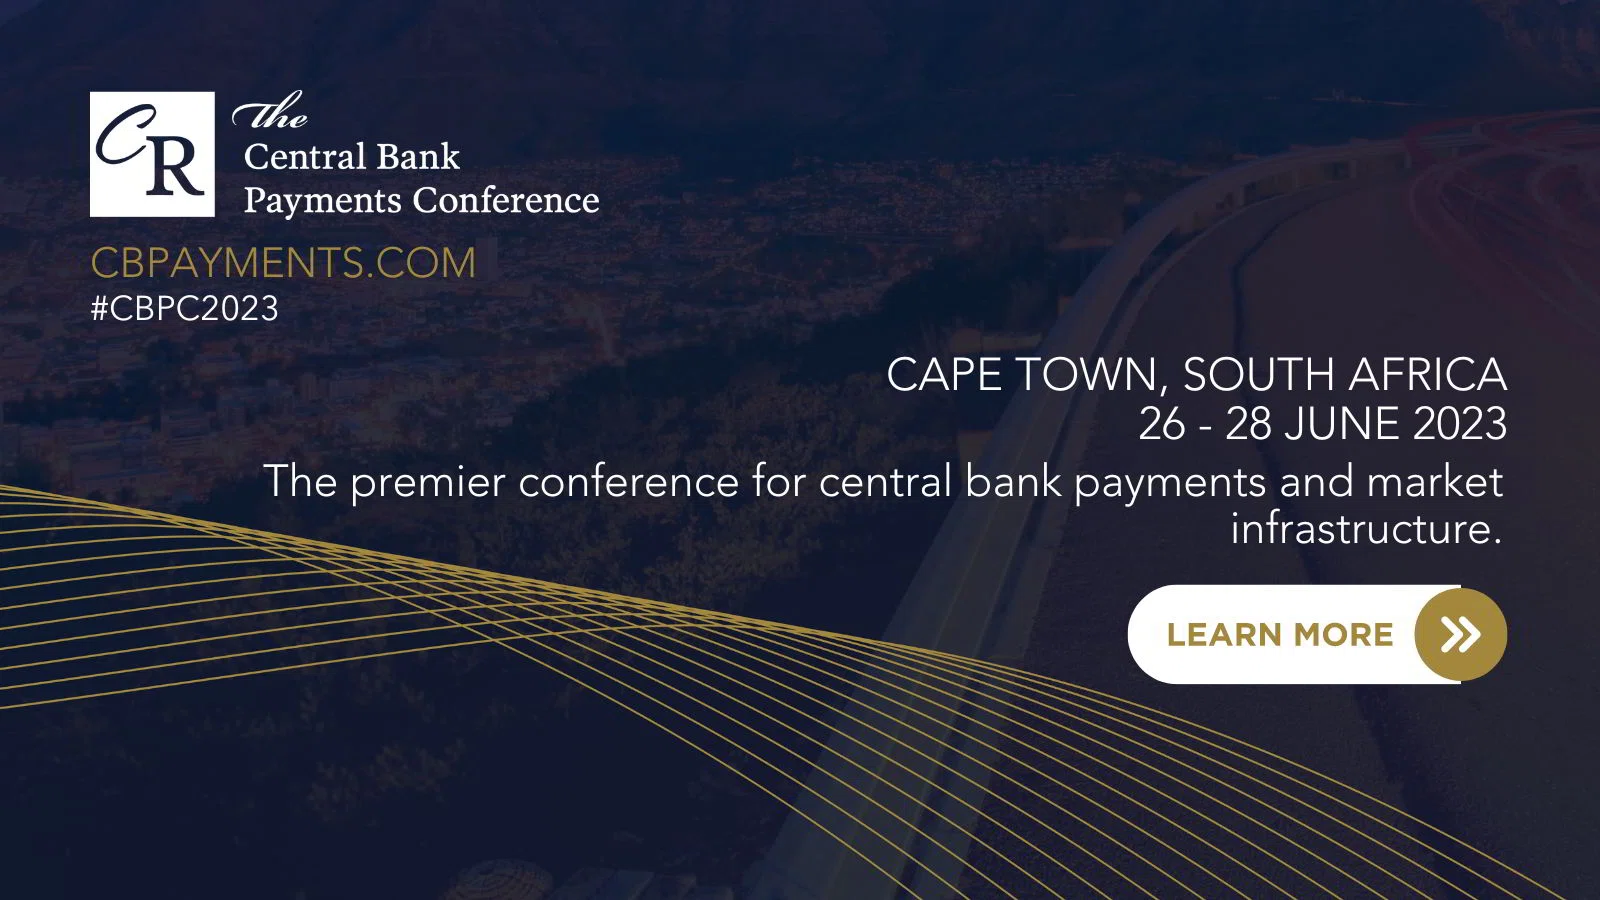 Central Bank Payments Conference